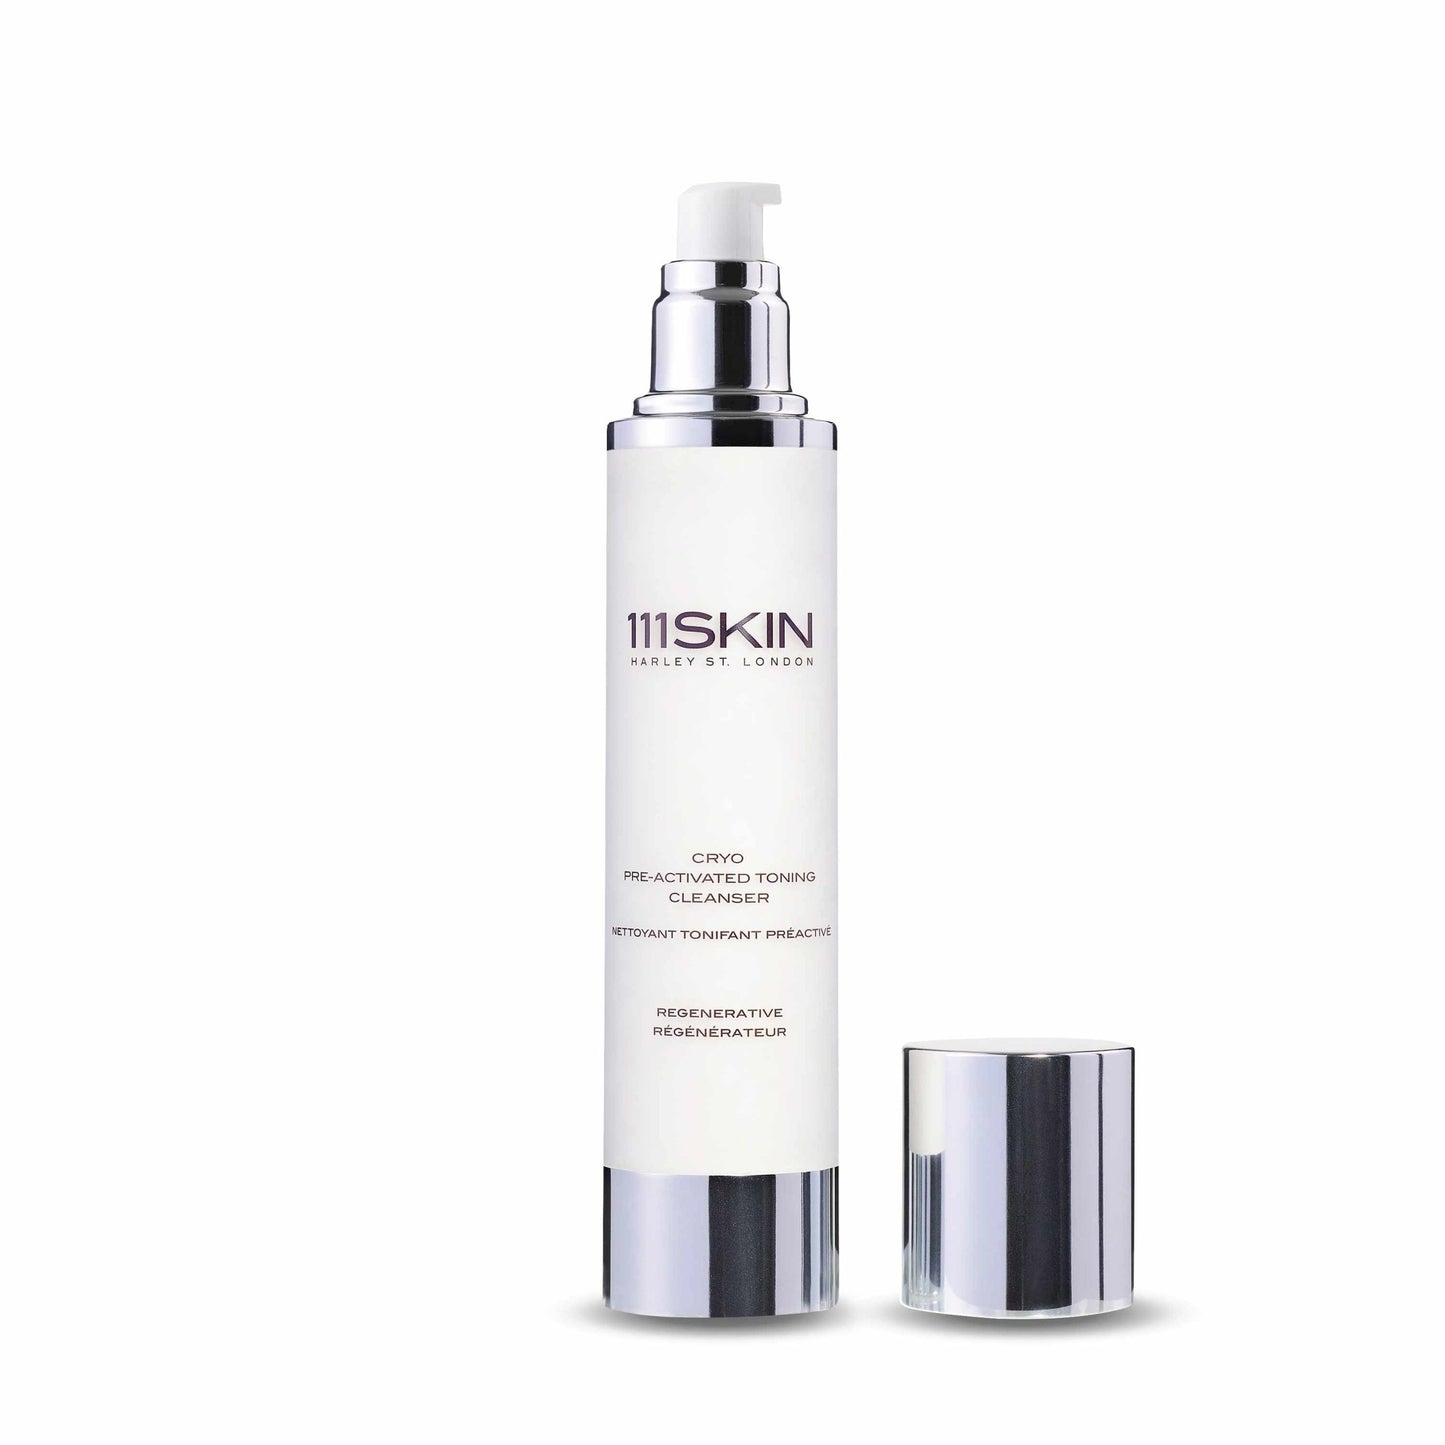 Cryo Pre-Activated Toning Cleanser - 111SKIN EU